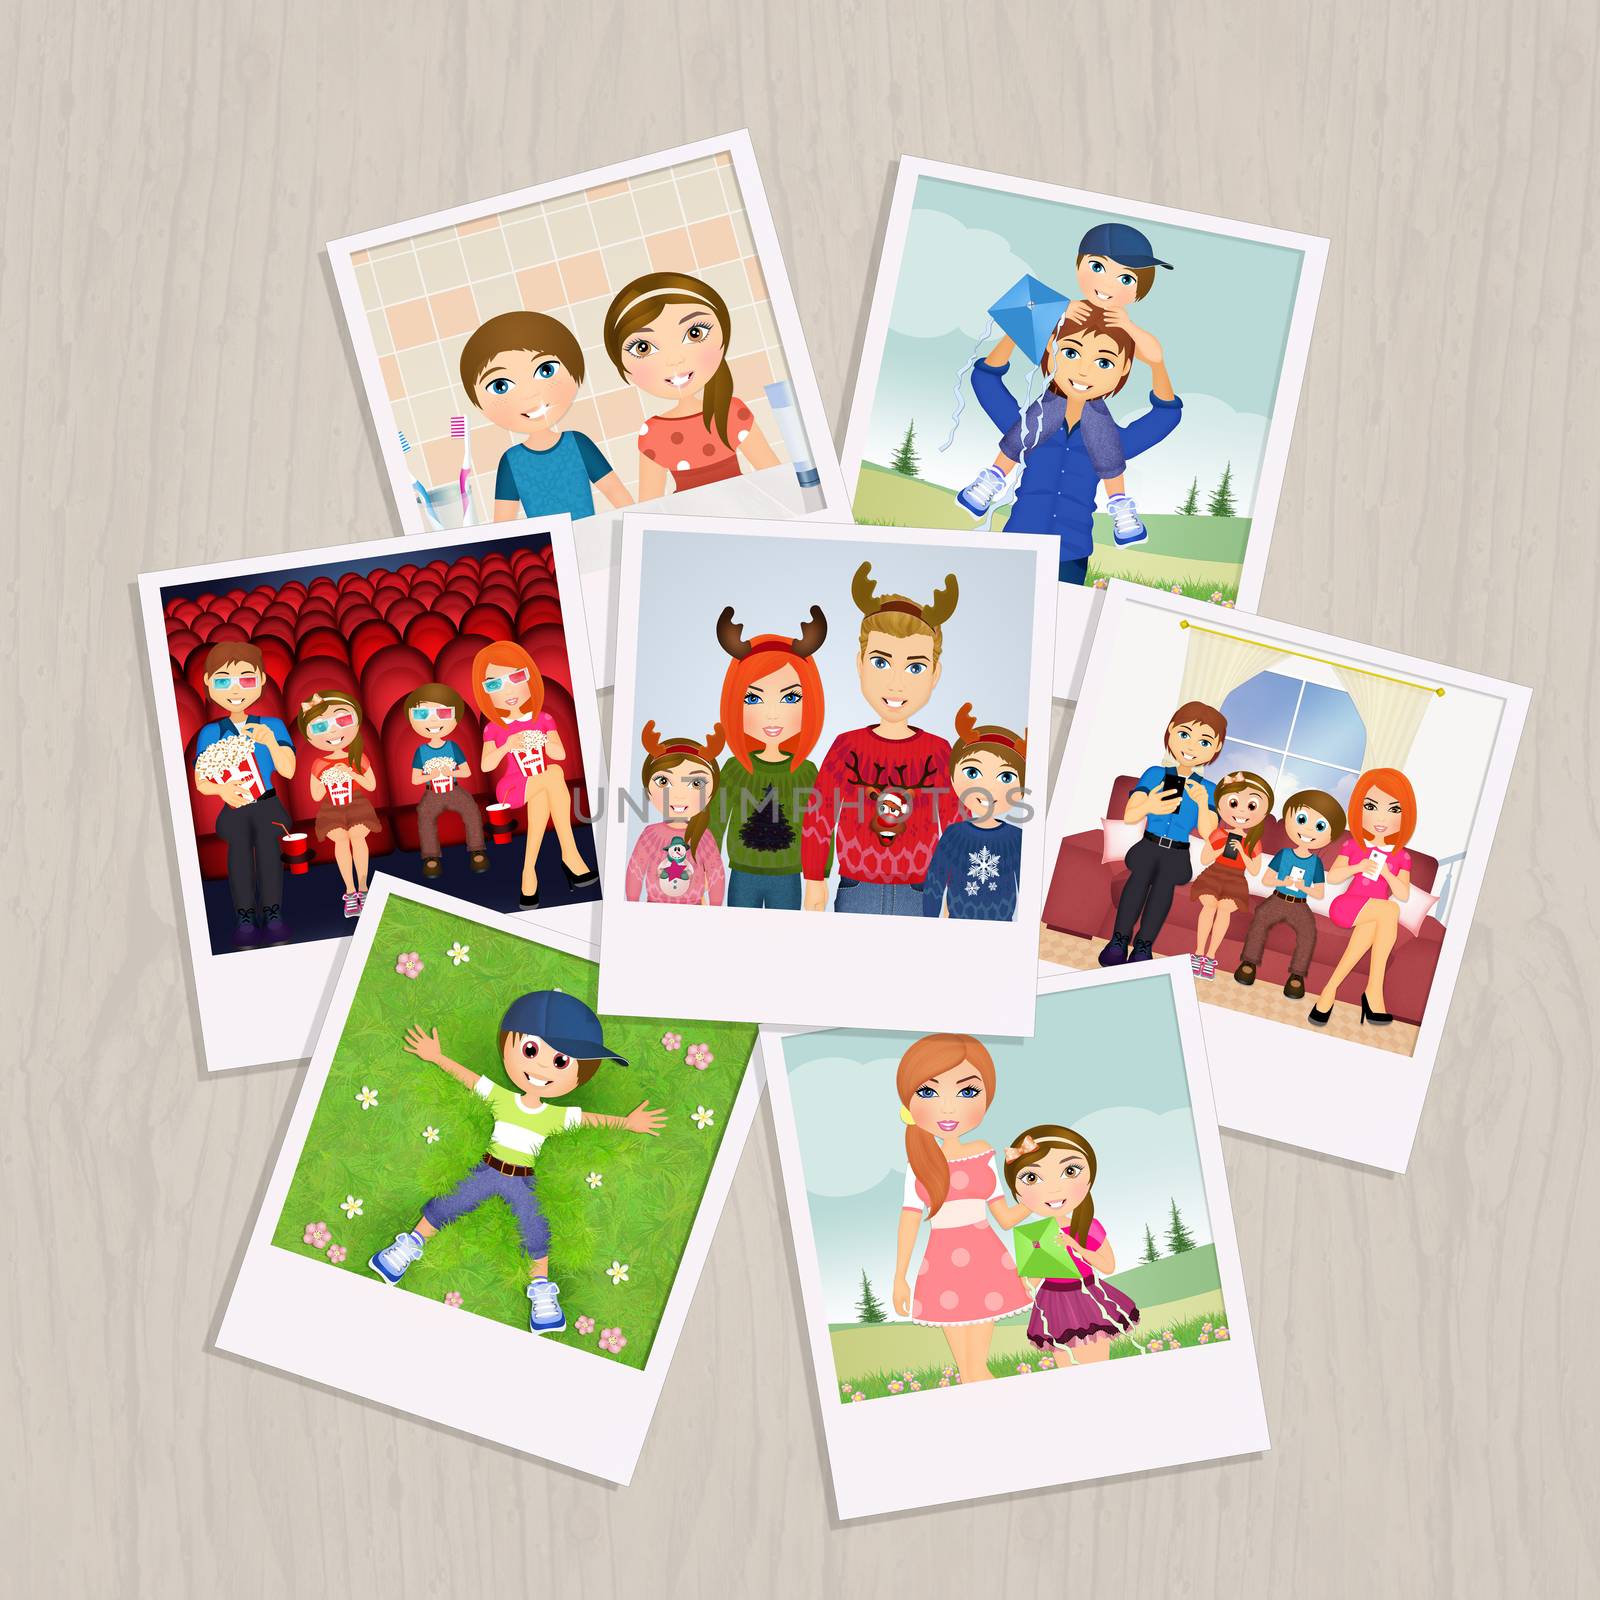 illustration of photographs with family memories